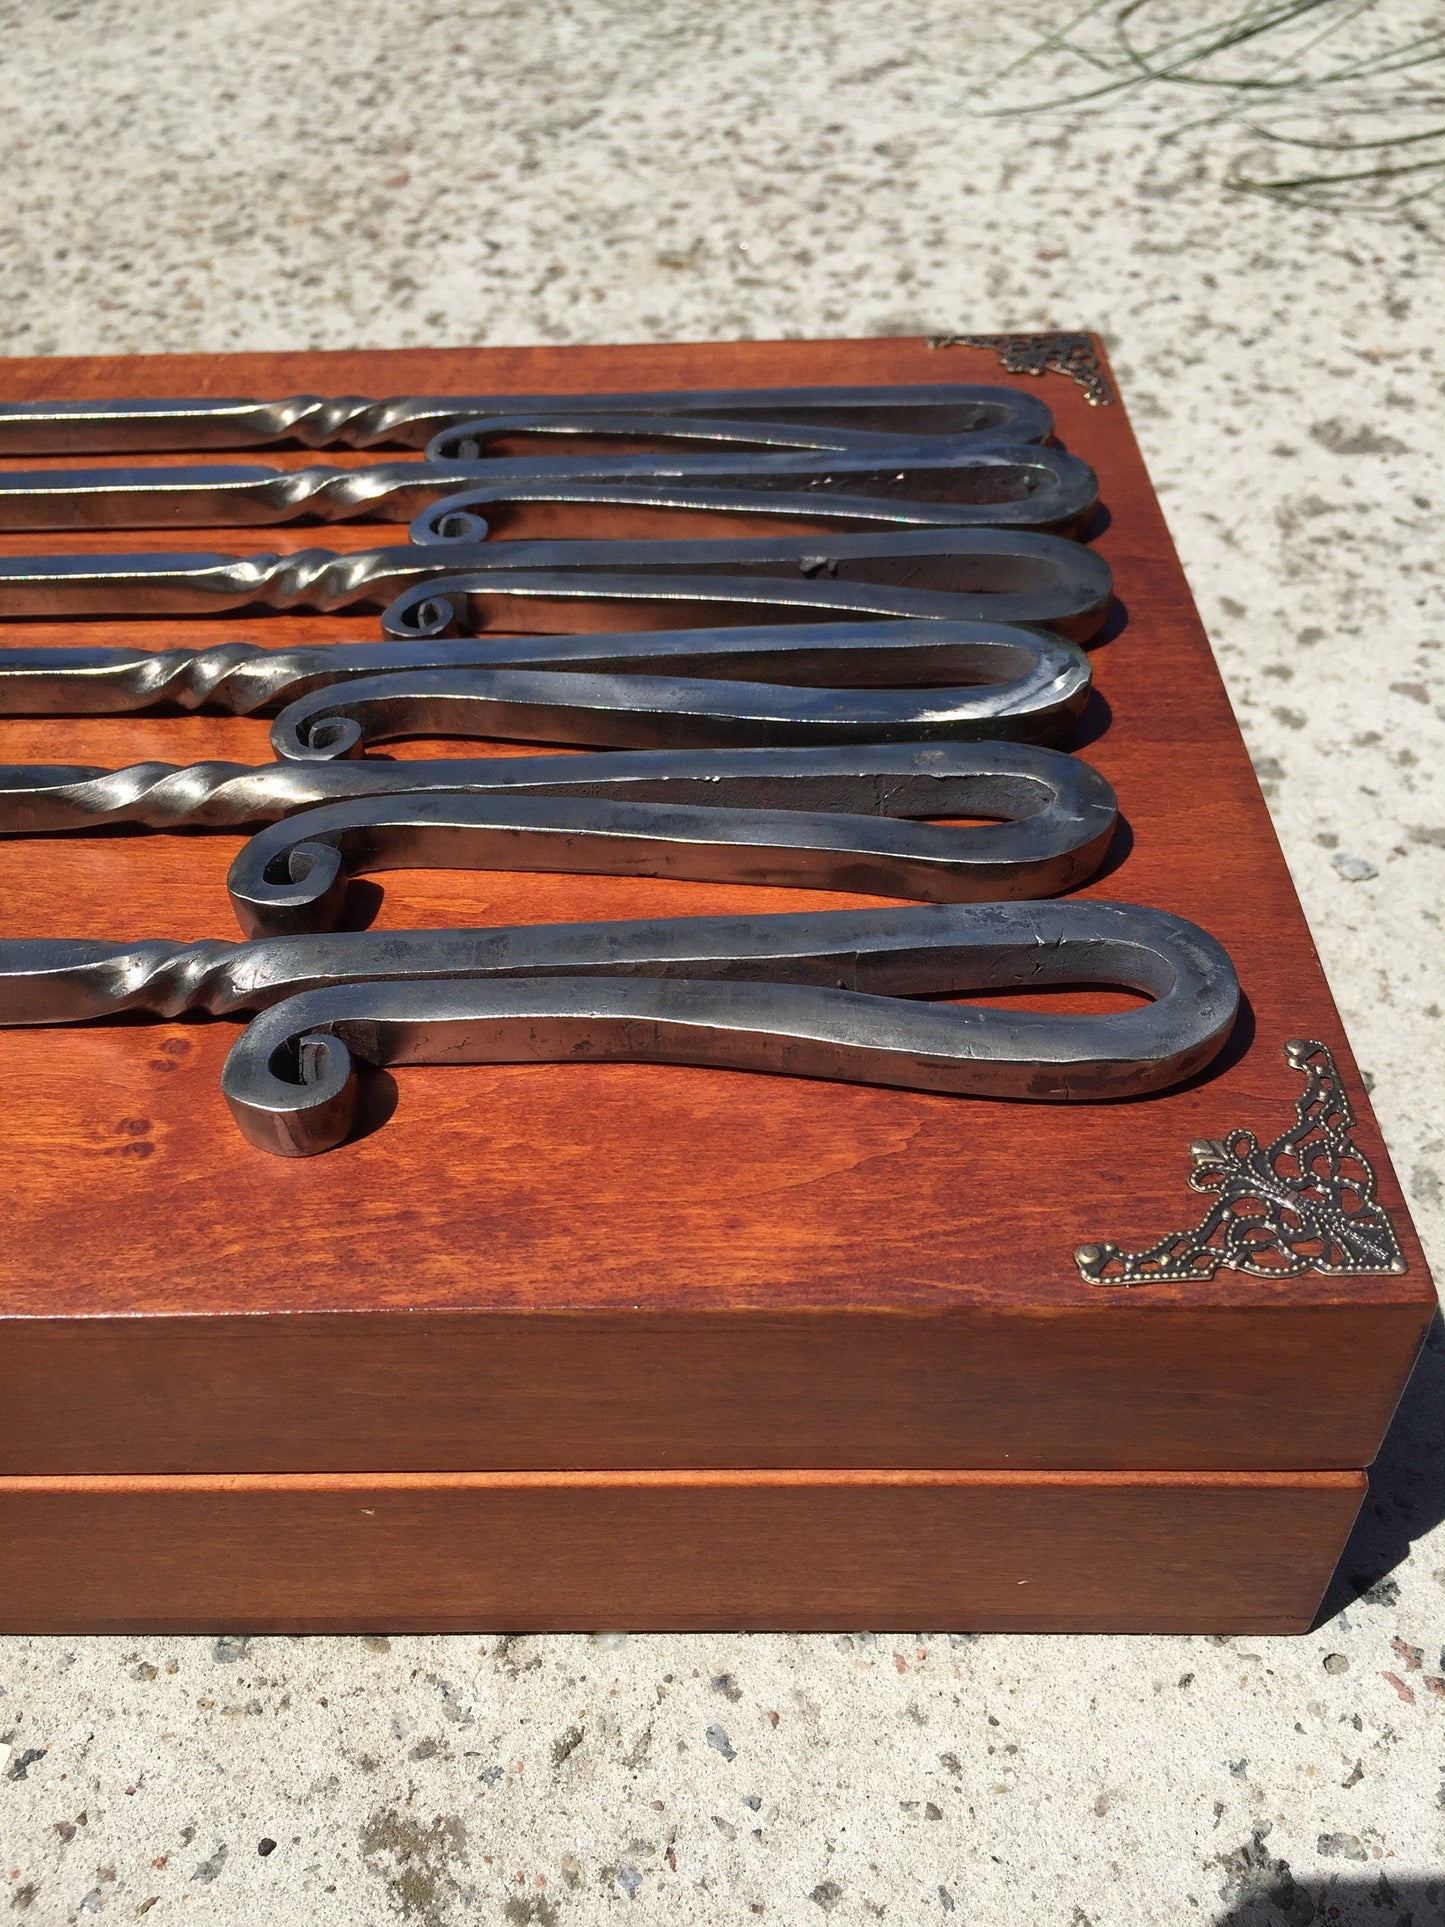 Grilling set, BBQ set, grill master, master griller, BBQ lovers, grilling, grill, griller, grill tools, groomsman gift, grilling gifts